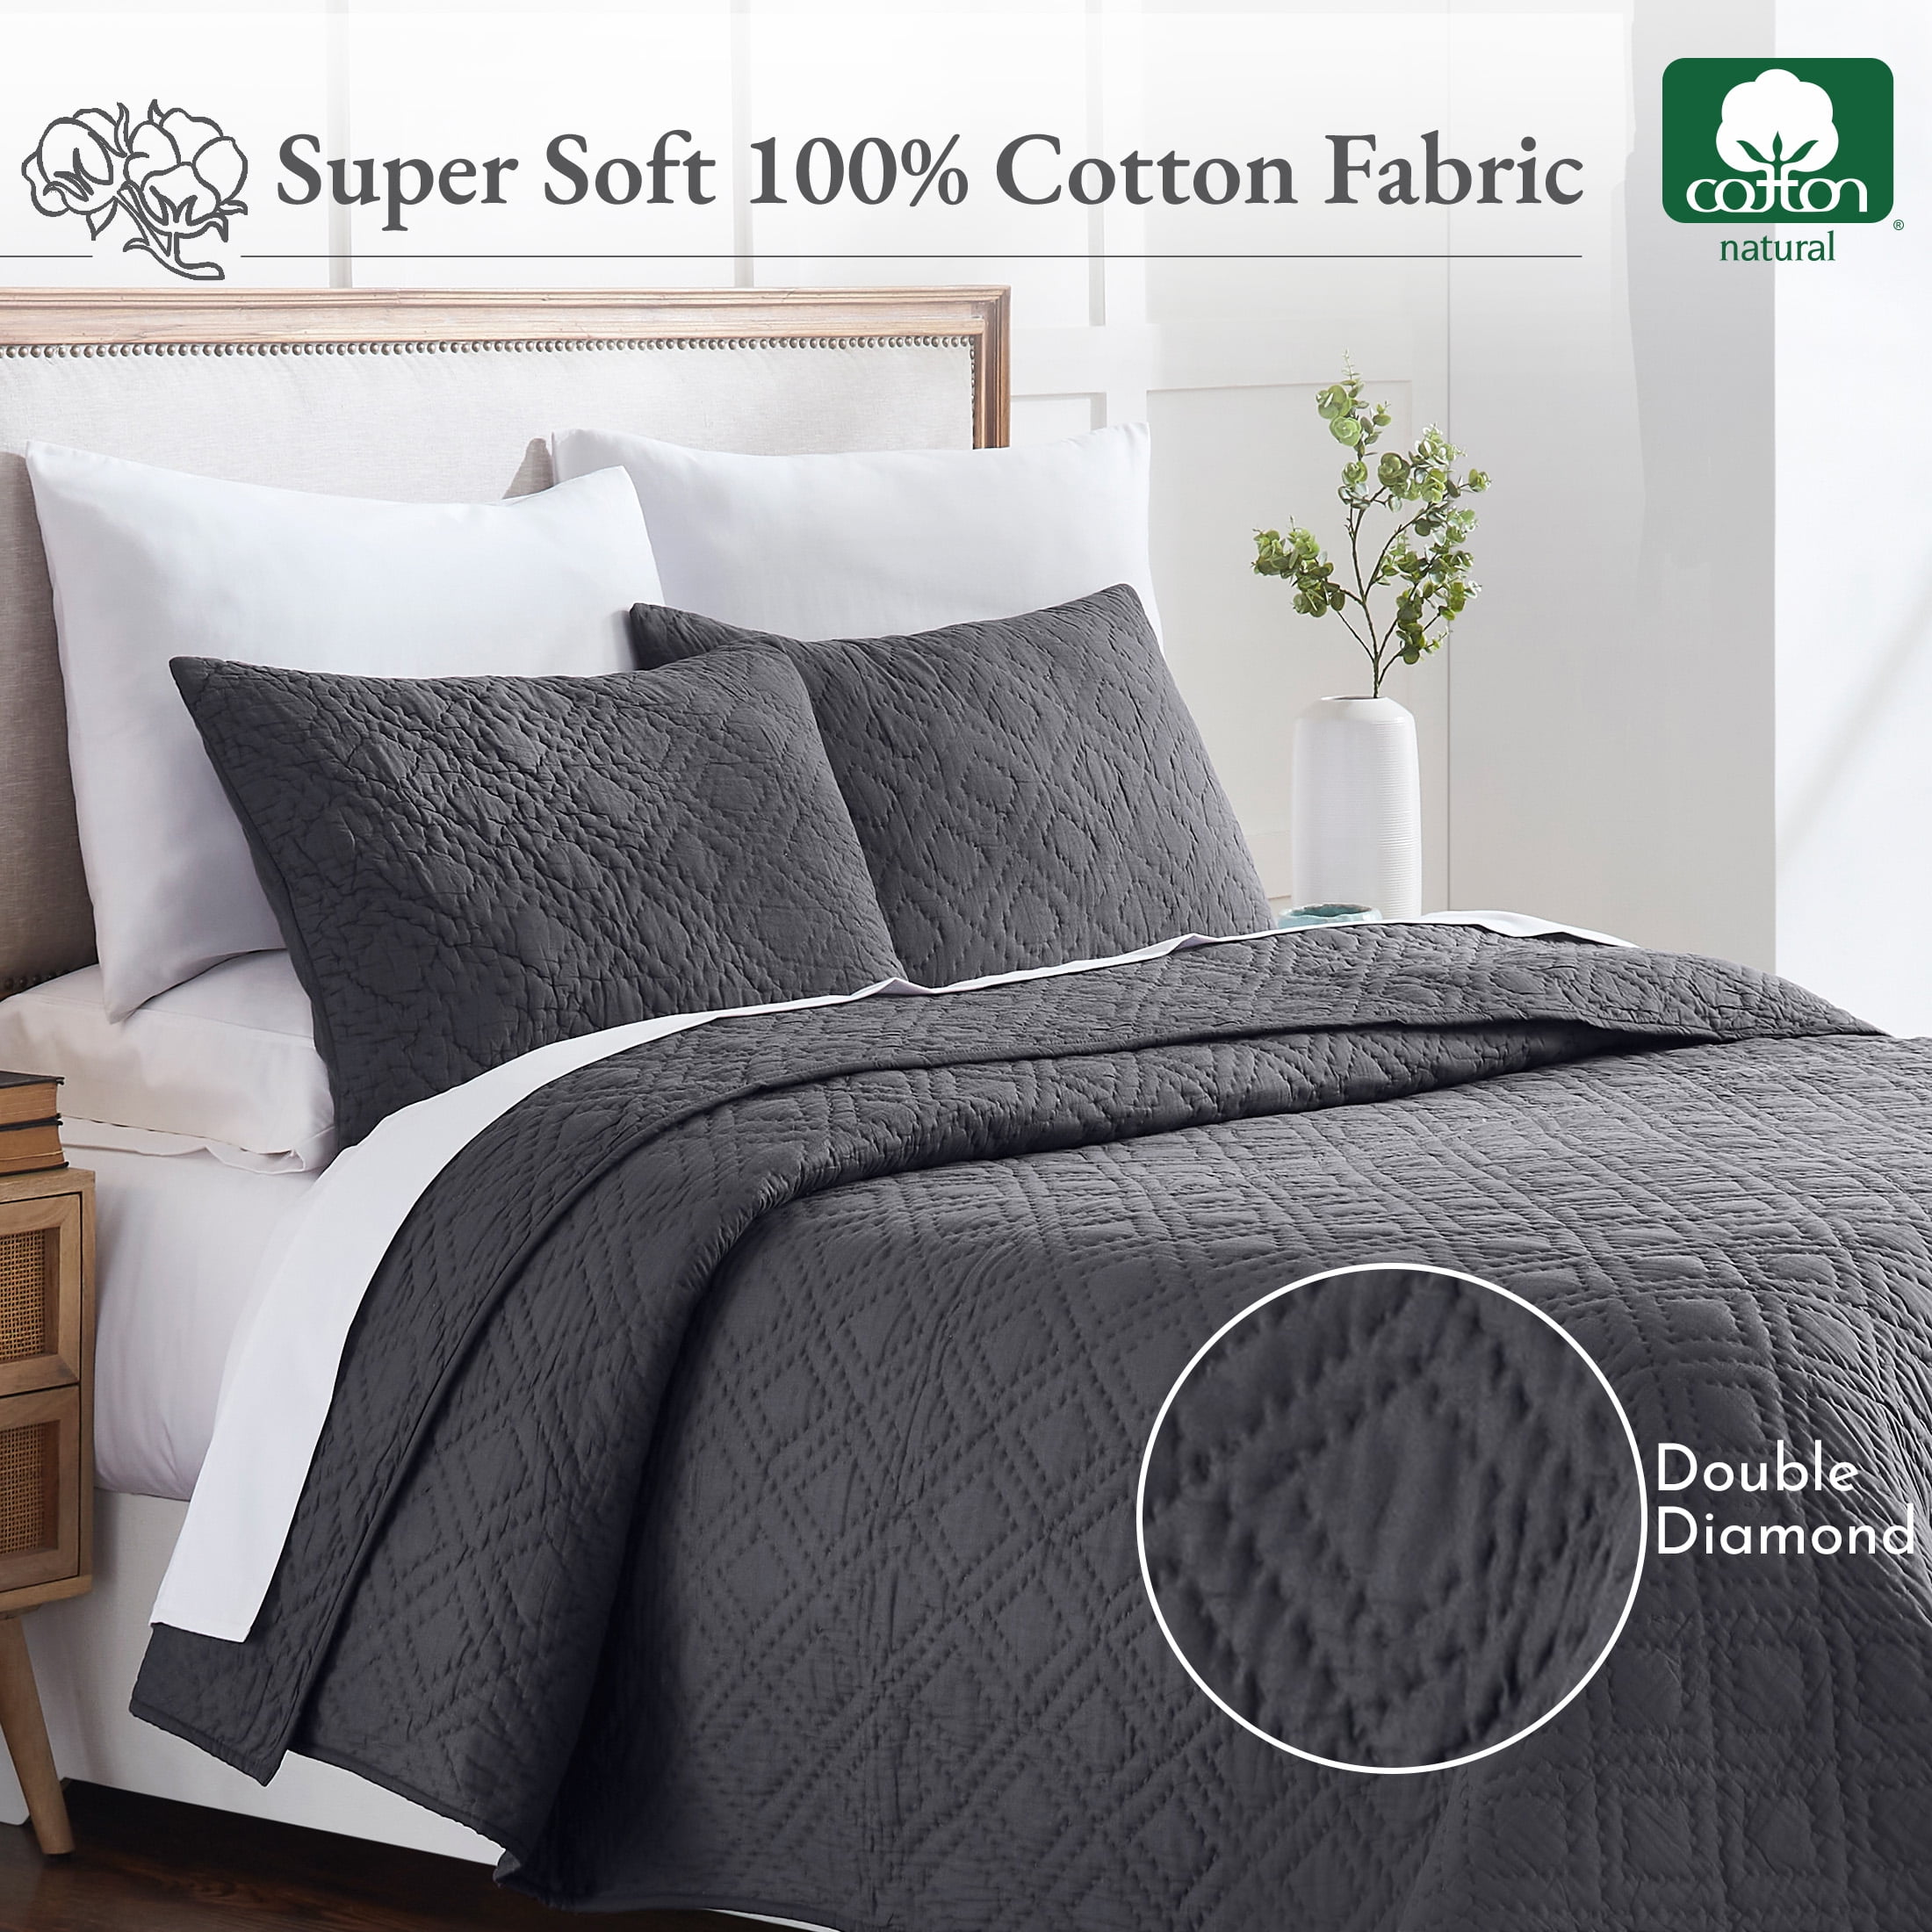 Soft 100% Cotton Hand-Quilted King Size Quilt Bedding Set, Pure